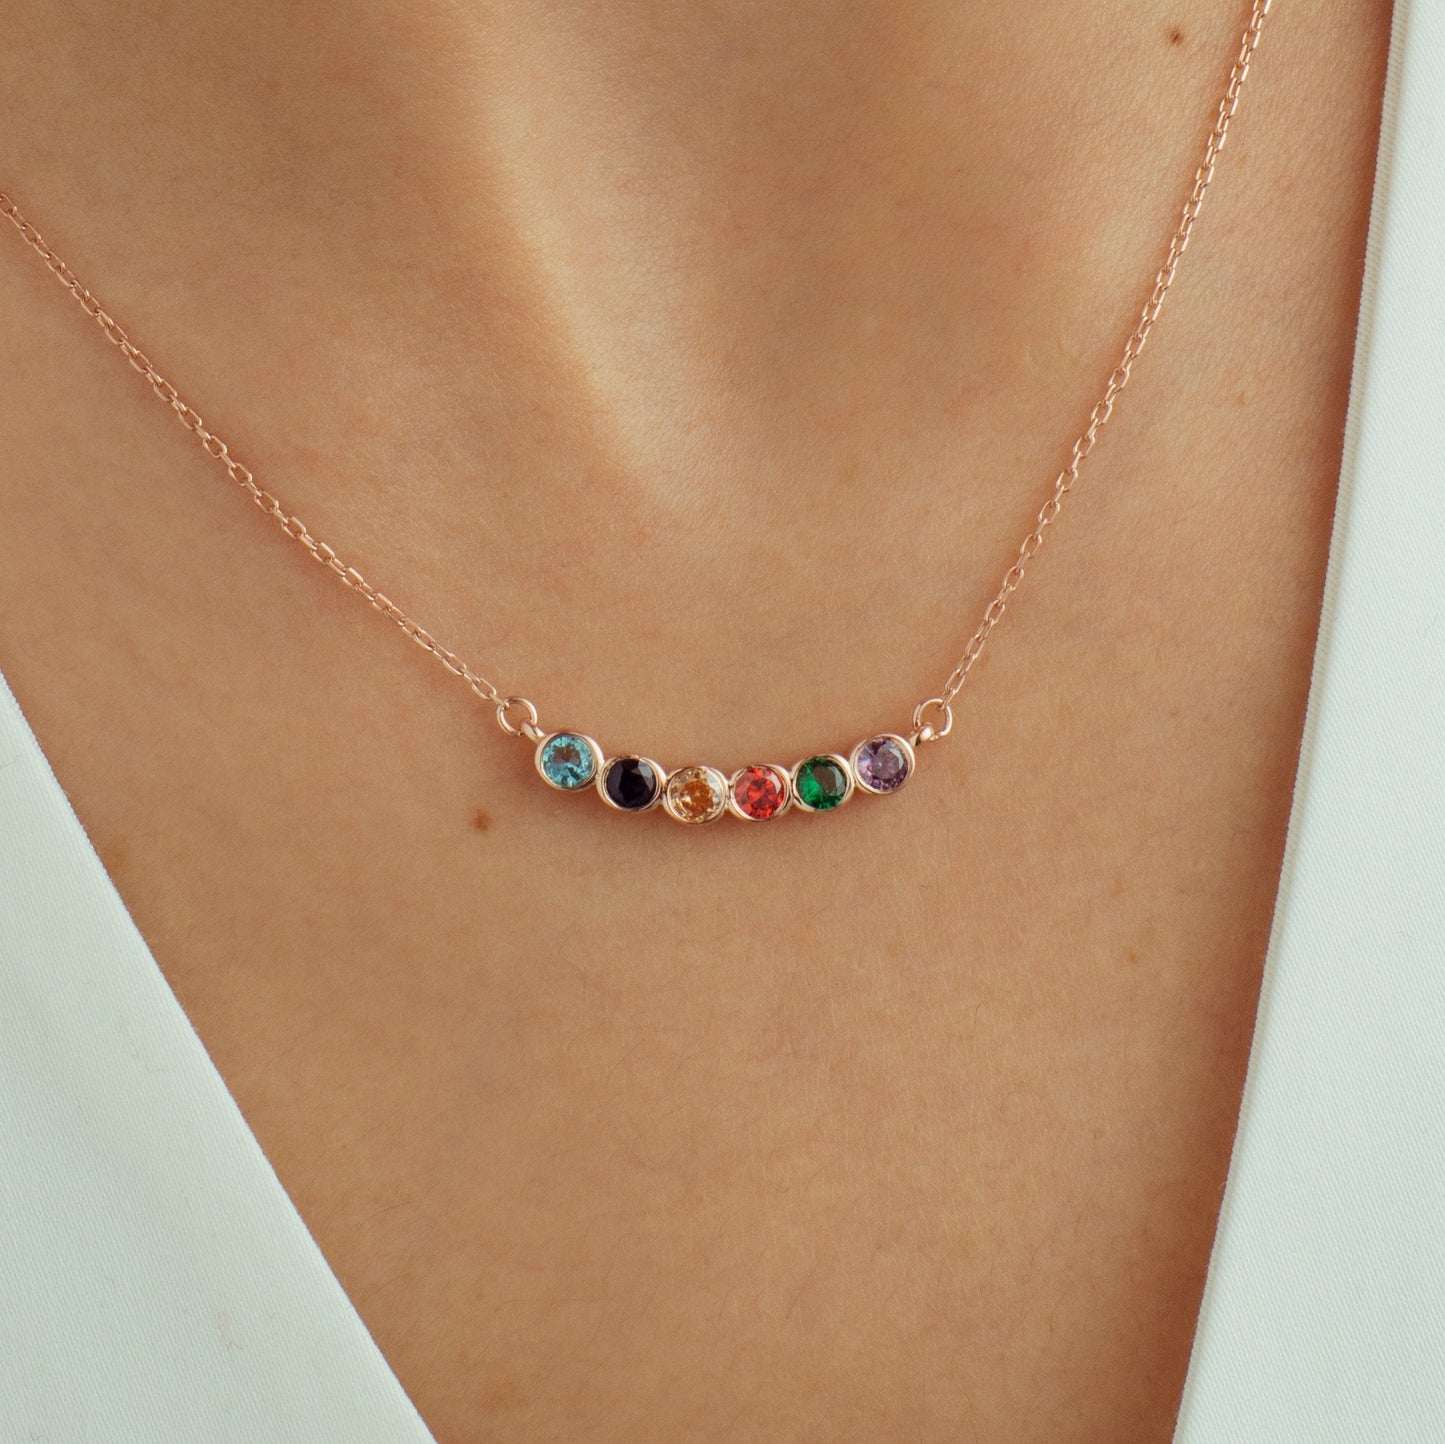 Personalized Family Birthstone Necklace